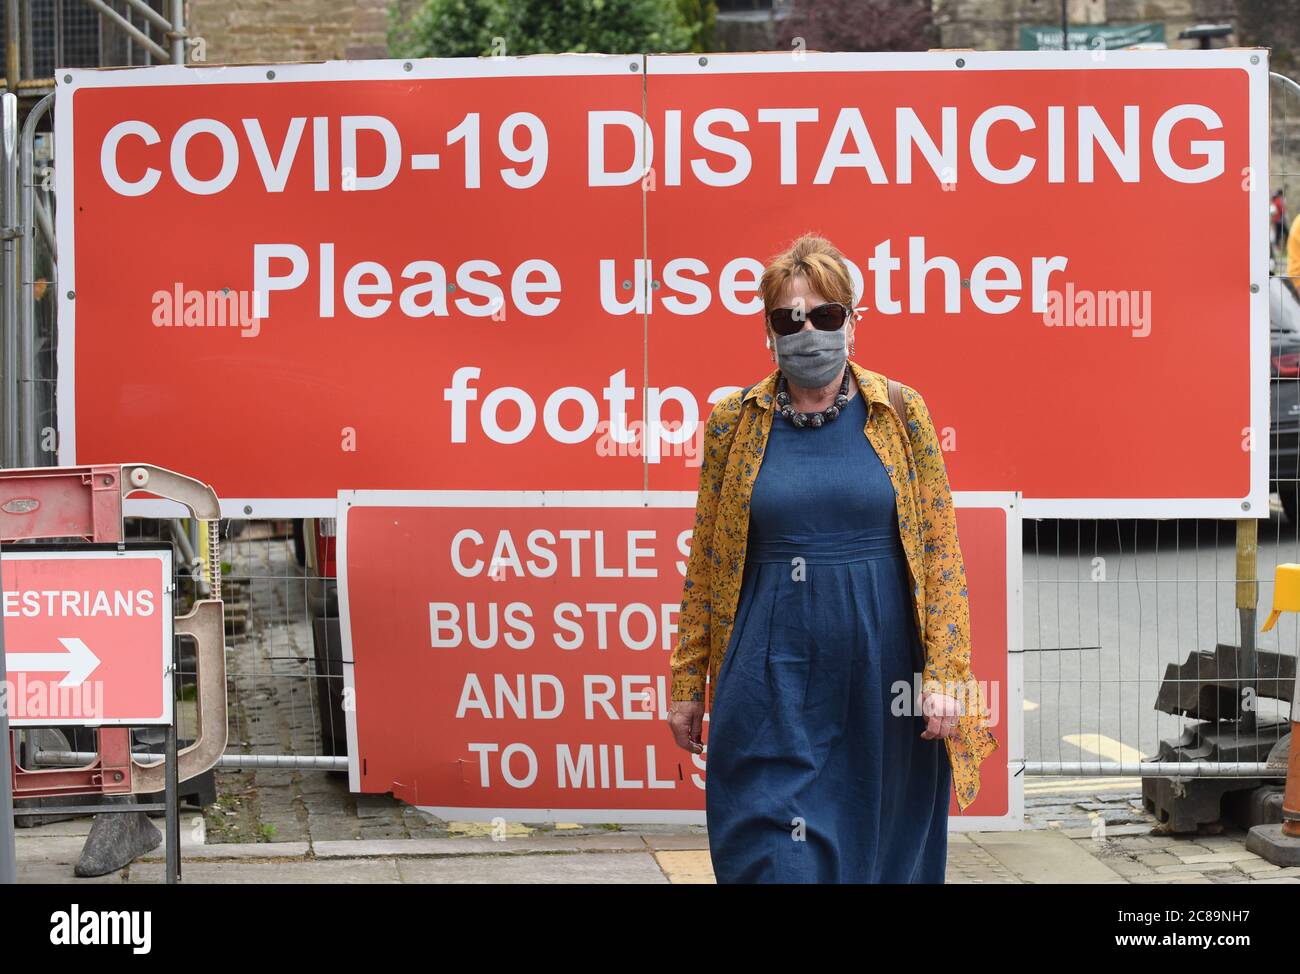 Ludlow, Shropshire, Uk July 22nd 2020. Shopper wearing face mask in the historic market town of Ludlow in Shropshire during the Covid 19 pandemic. Credit: David Bagnall. coronavirus covid 19 pandemic Stock Photo